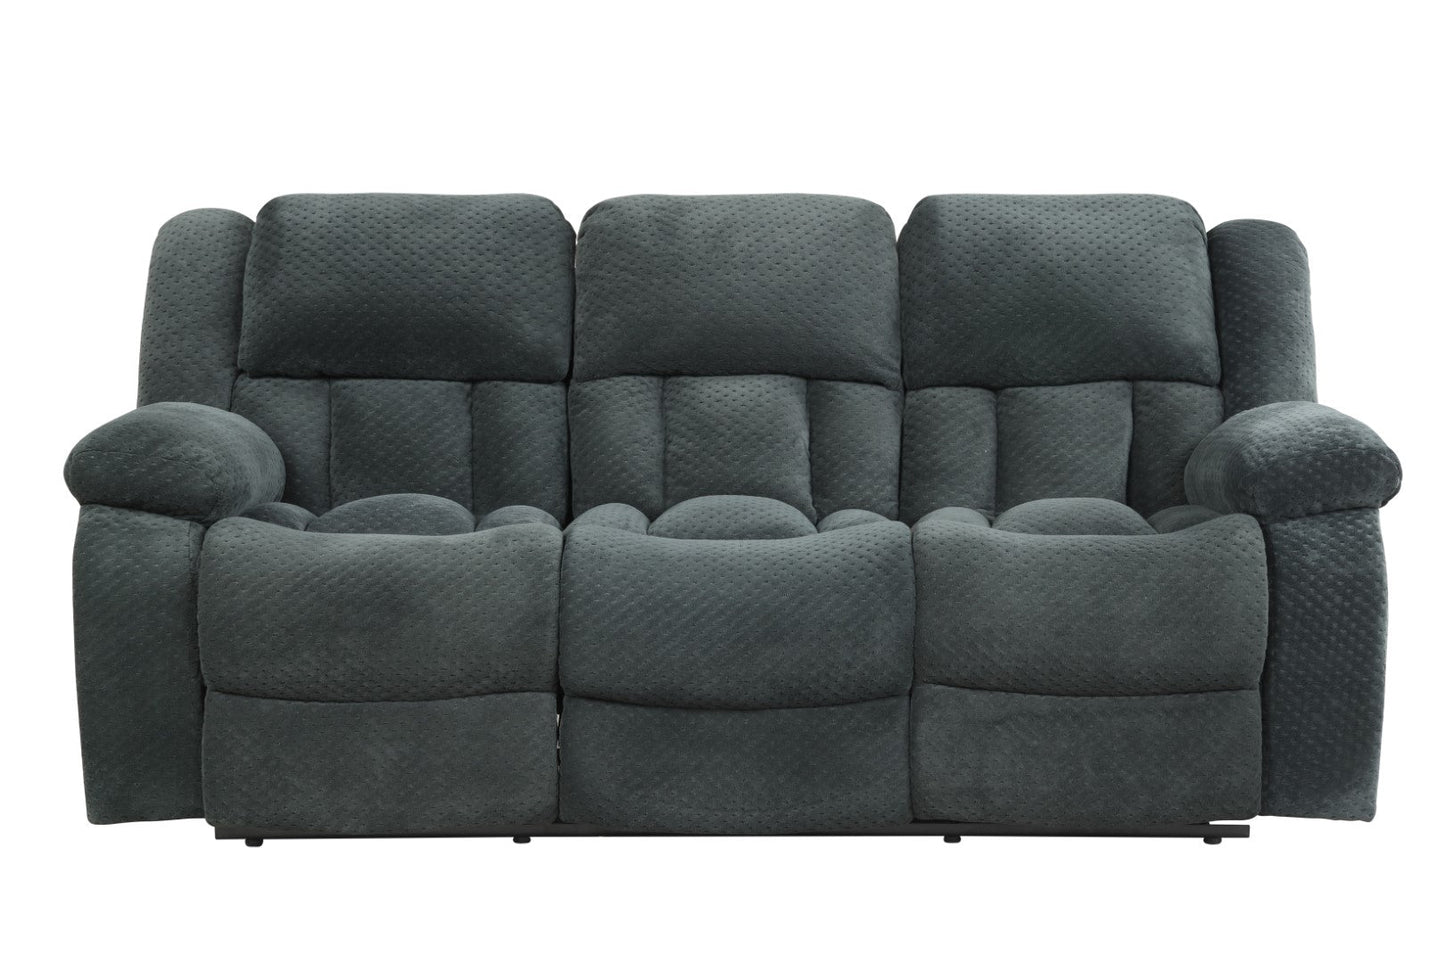 Galaxy Home Armada Manual Reclining Sofa Made with Chenille Fabric Green Chenille Fabric